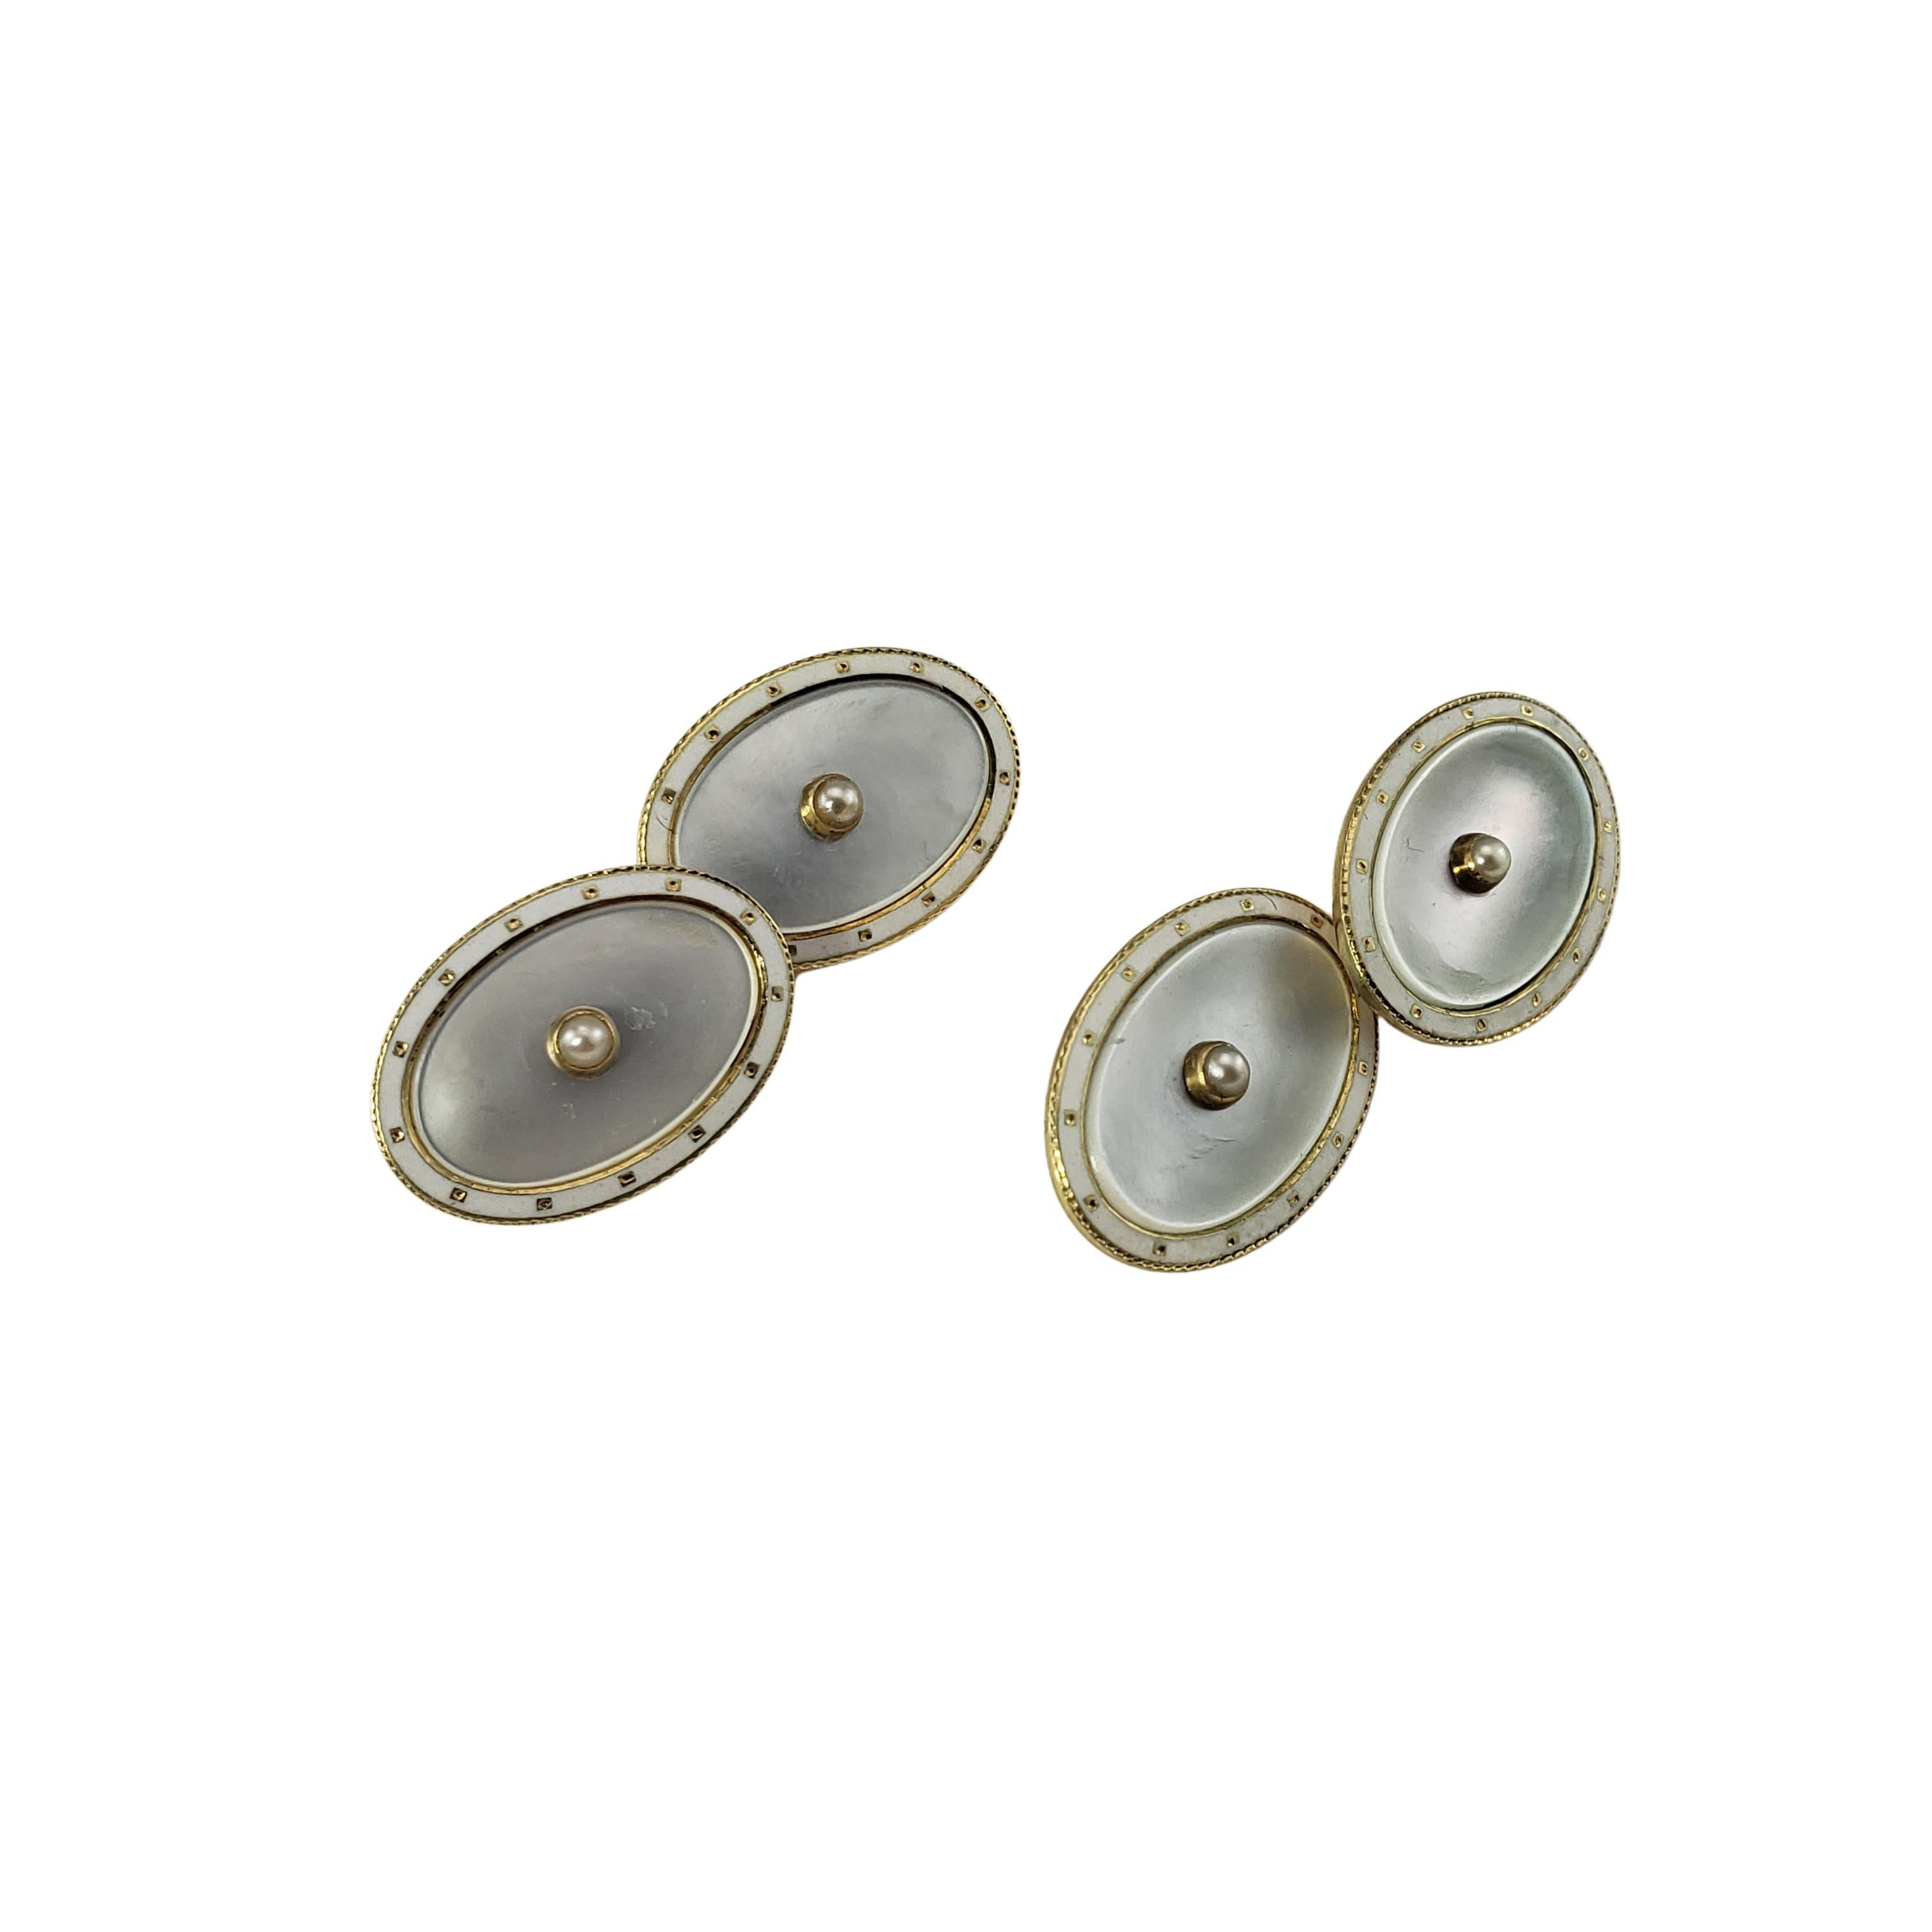 14 Karat Yellow Gold Mother of Pearl and Pearl Cufflinks-

These elegant cufflinks each feature one round pearl and beautifully detailed inlaid mother of pearl.

Size:  18 mm x 13 mm

Weight:  6.1 dwt. /  9.6 gr.

Stamped:  14K

Very good condition,